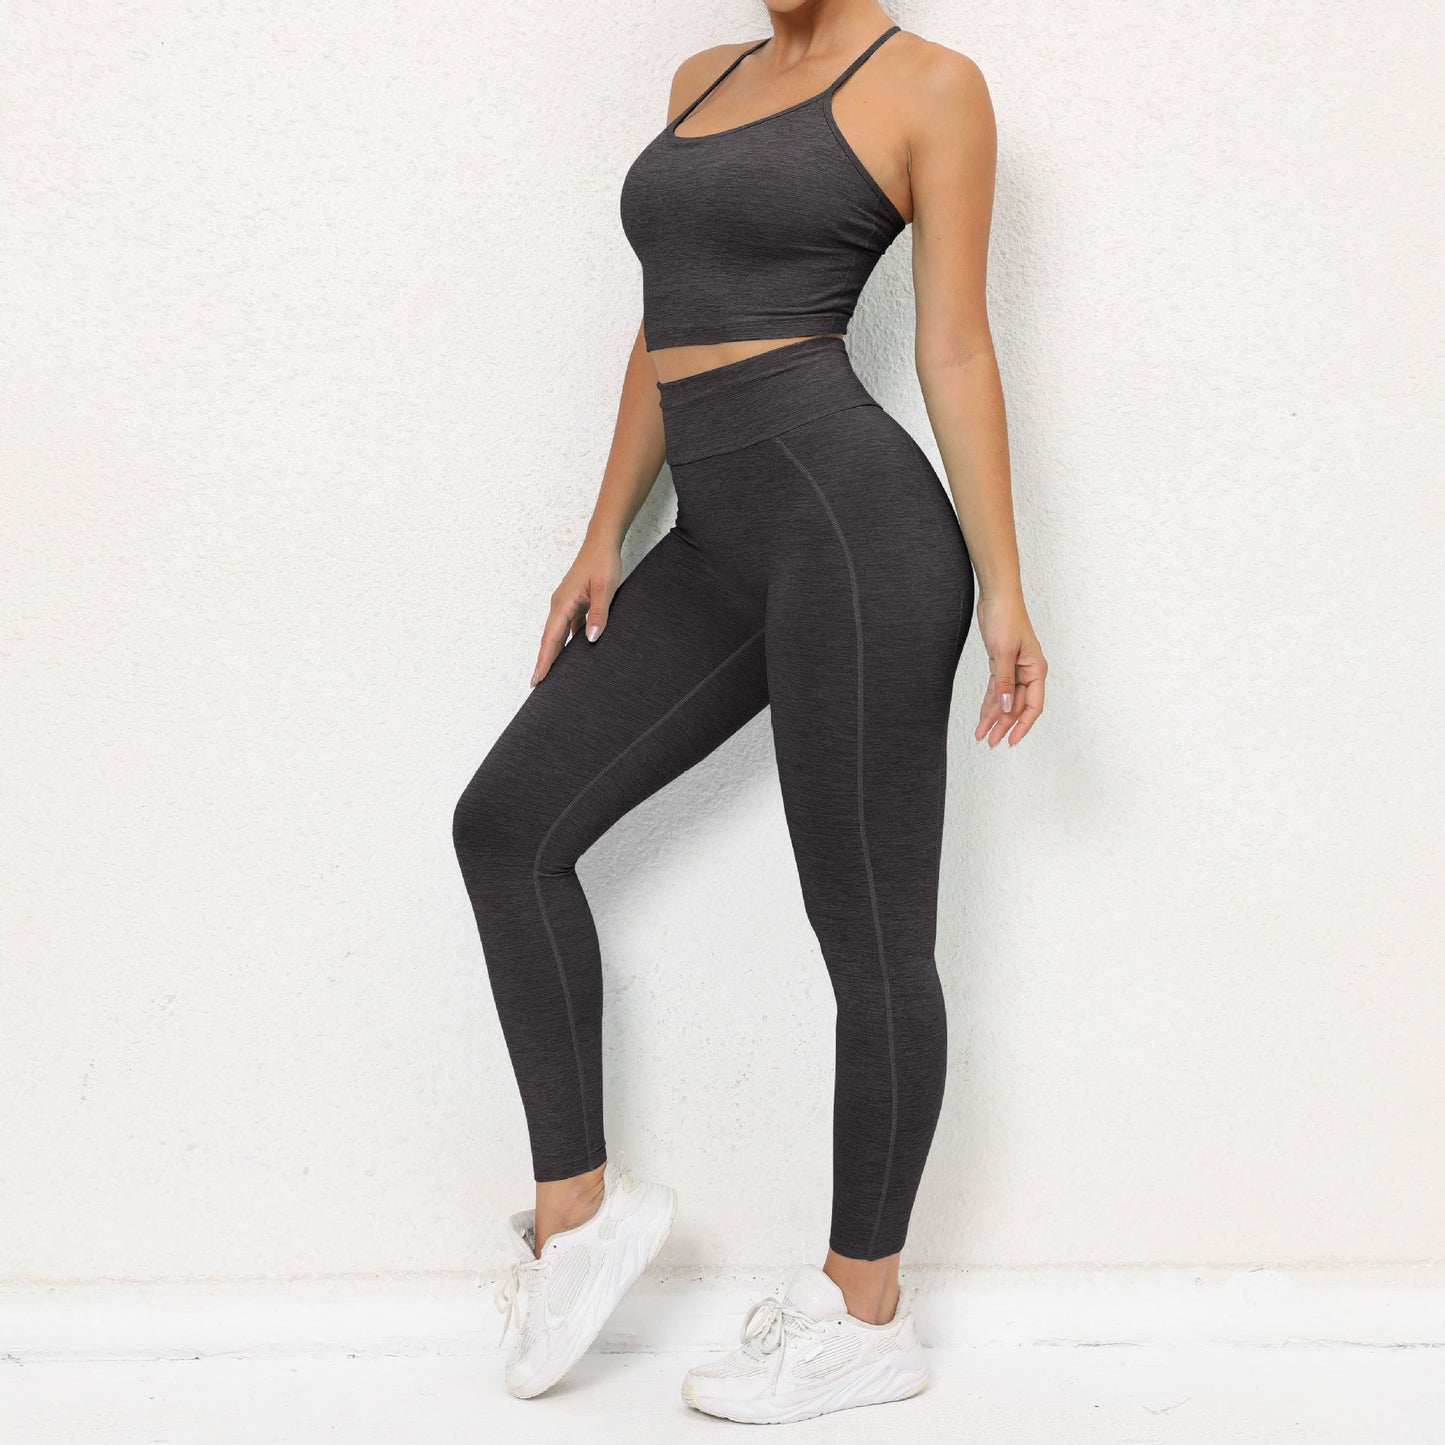 Sexy High Waist Yoga Suits for Women-Activewear-Gray-S-Free Shipping at meselling99